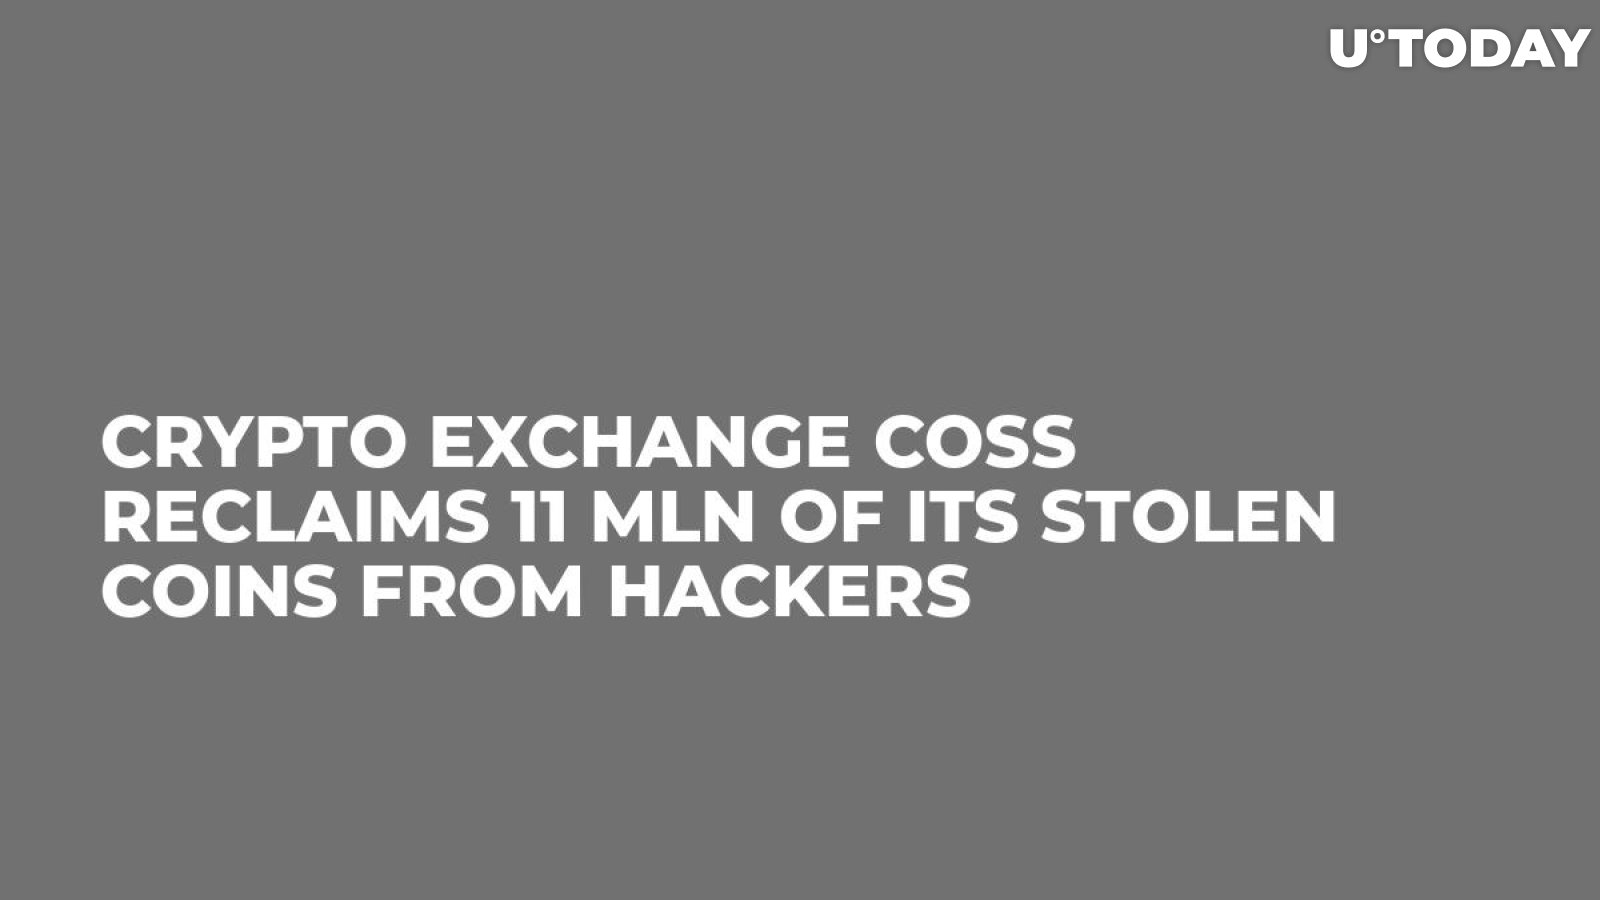 Crypto Exchange COSS Reclaims 11 Mln of Its Stolen Coins from Hackers